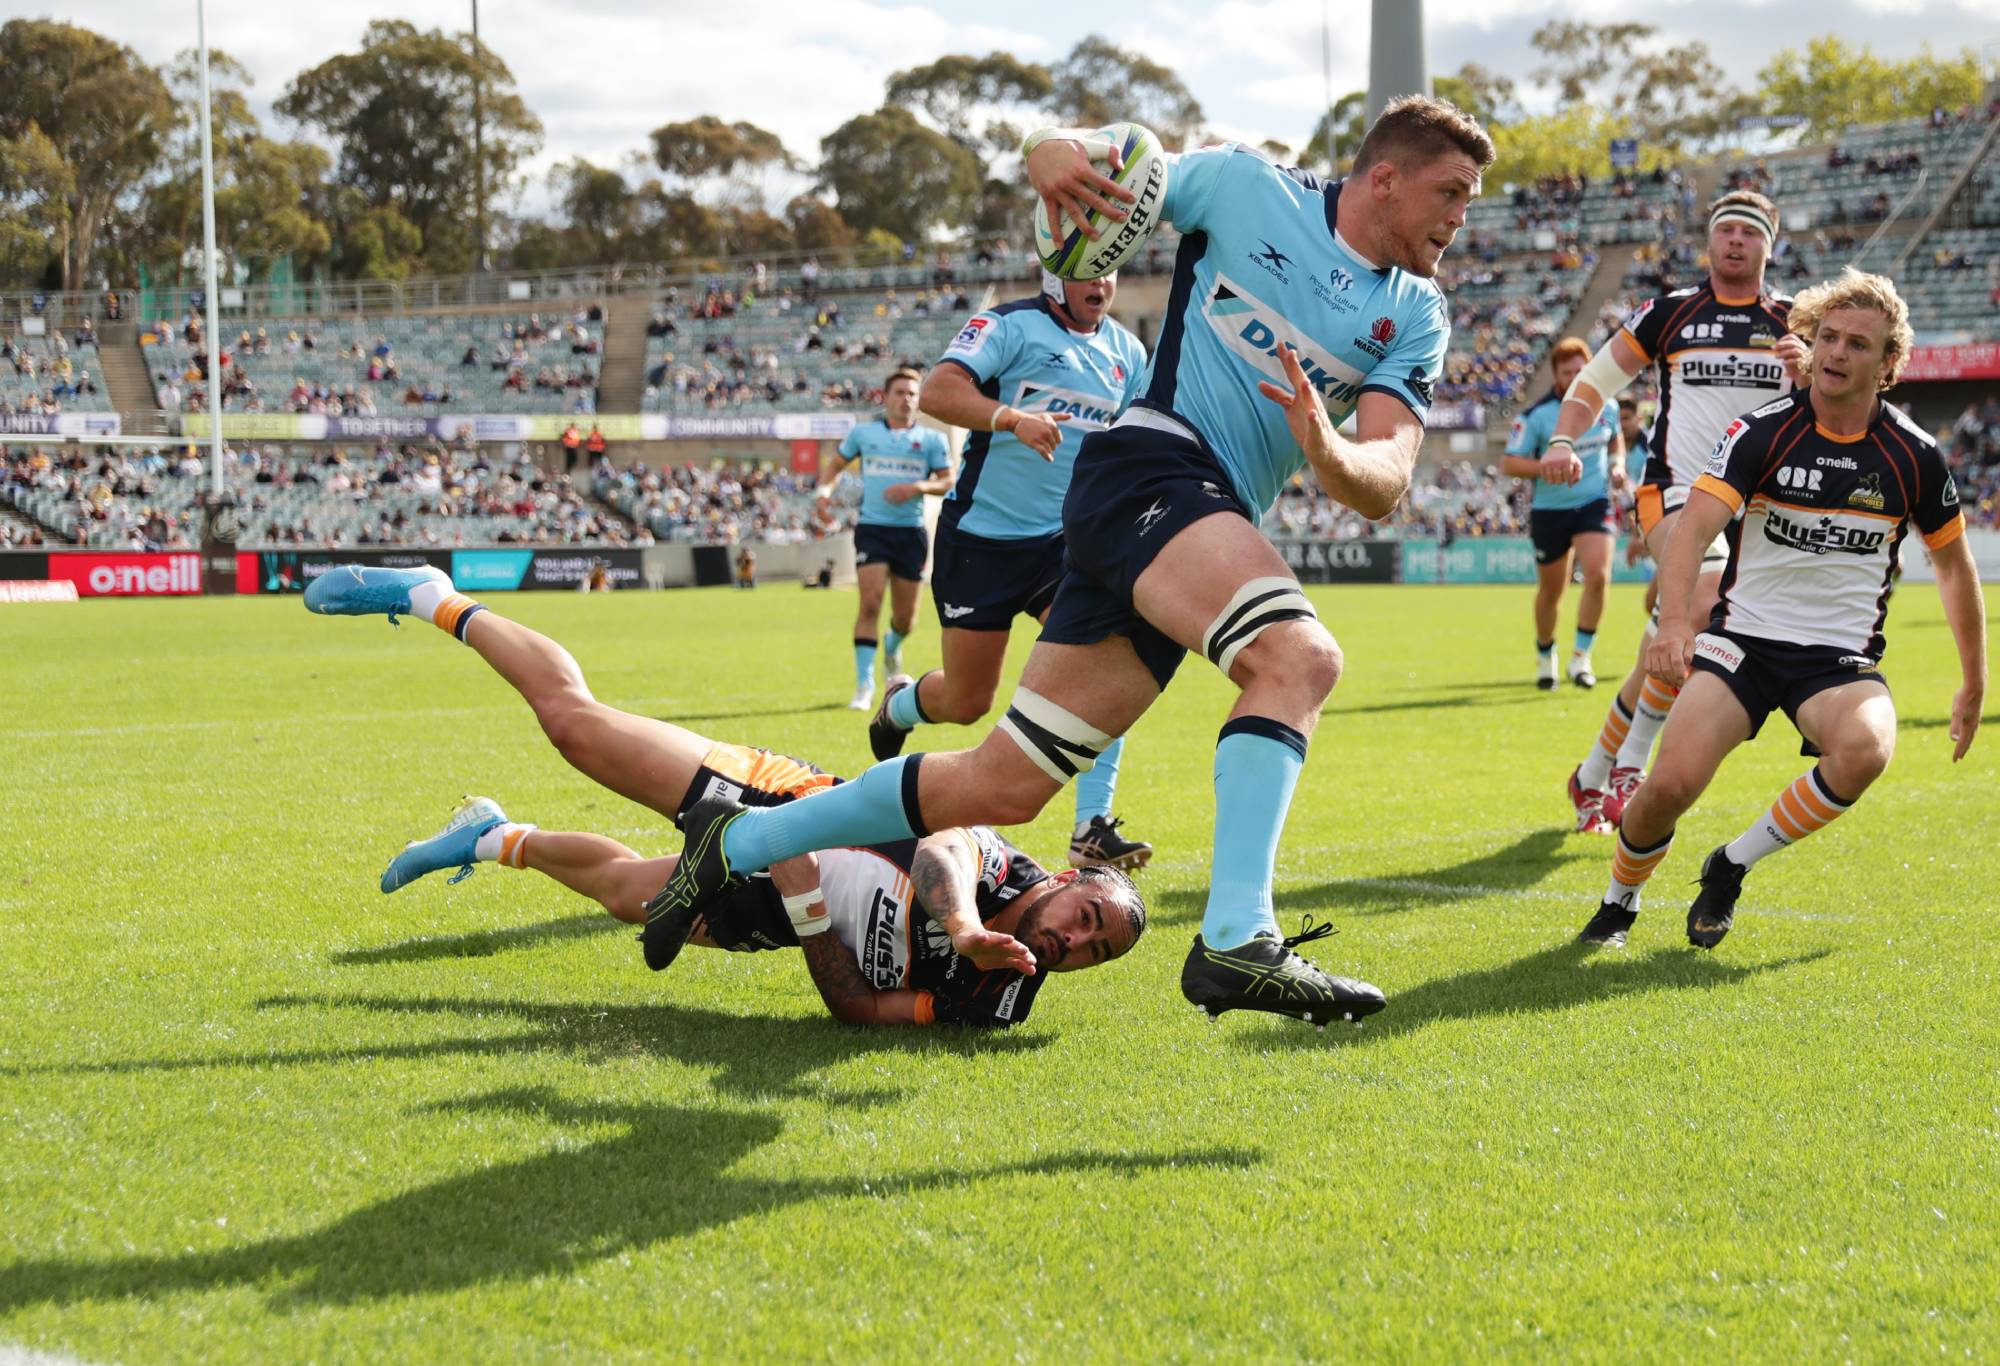 CANBERRA, AUSTRALIA - MARCH 15: Lachie Swinton of the Waratahs Is tackled by Andy Muirhead of the Brumbies during the round seven Super Rugby match between the Brumbies and the Waratahs at GIO Stadium on March 15, 2020 in Canberra, Australia. (Photo by Mark Metcalfe/Getty Images)